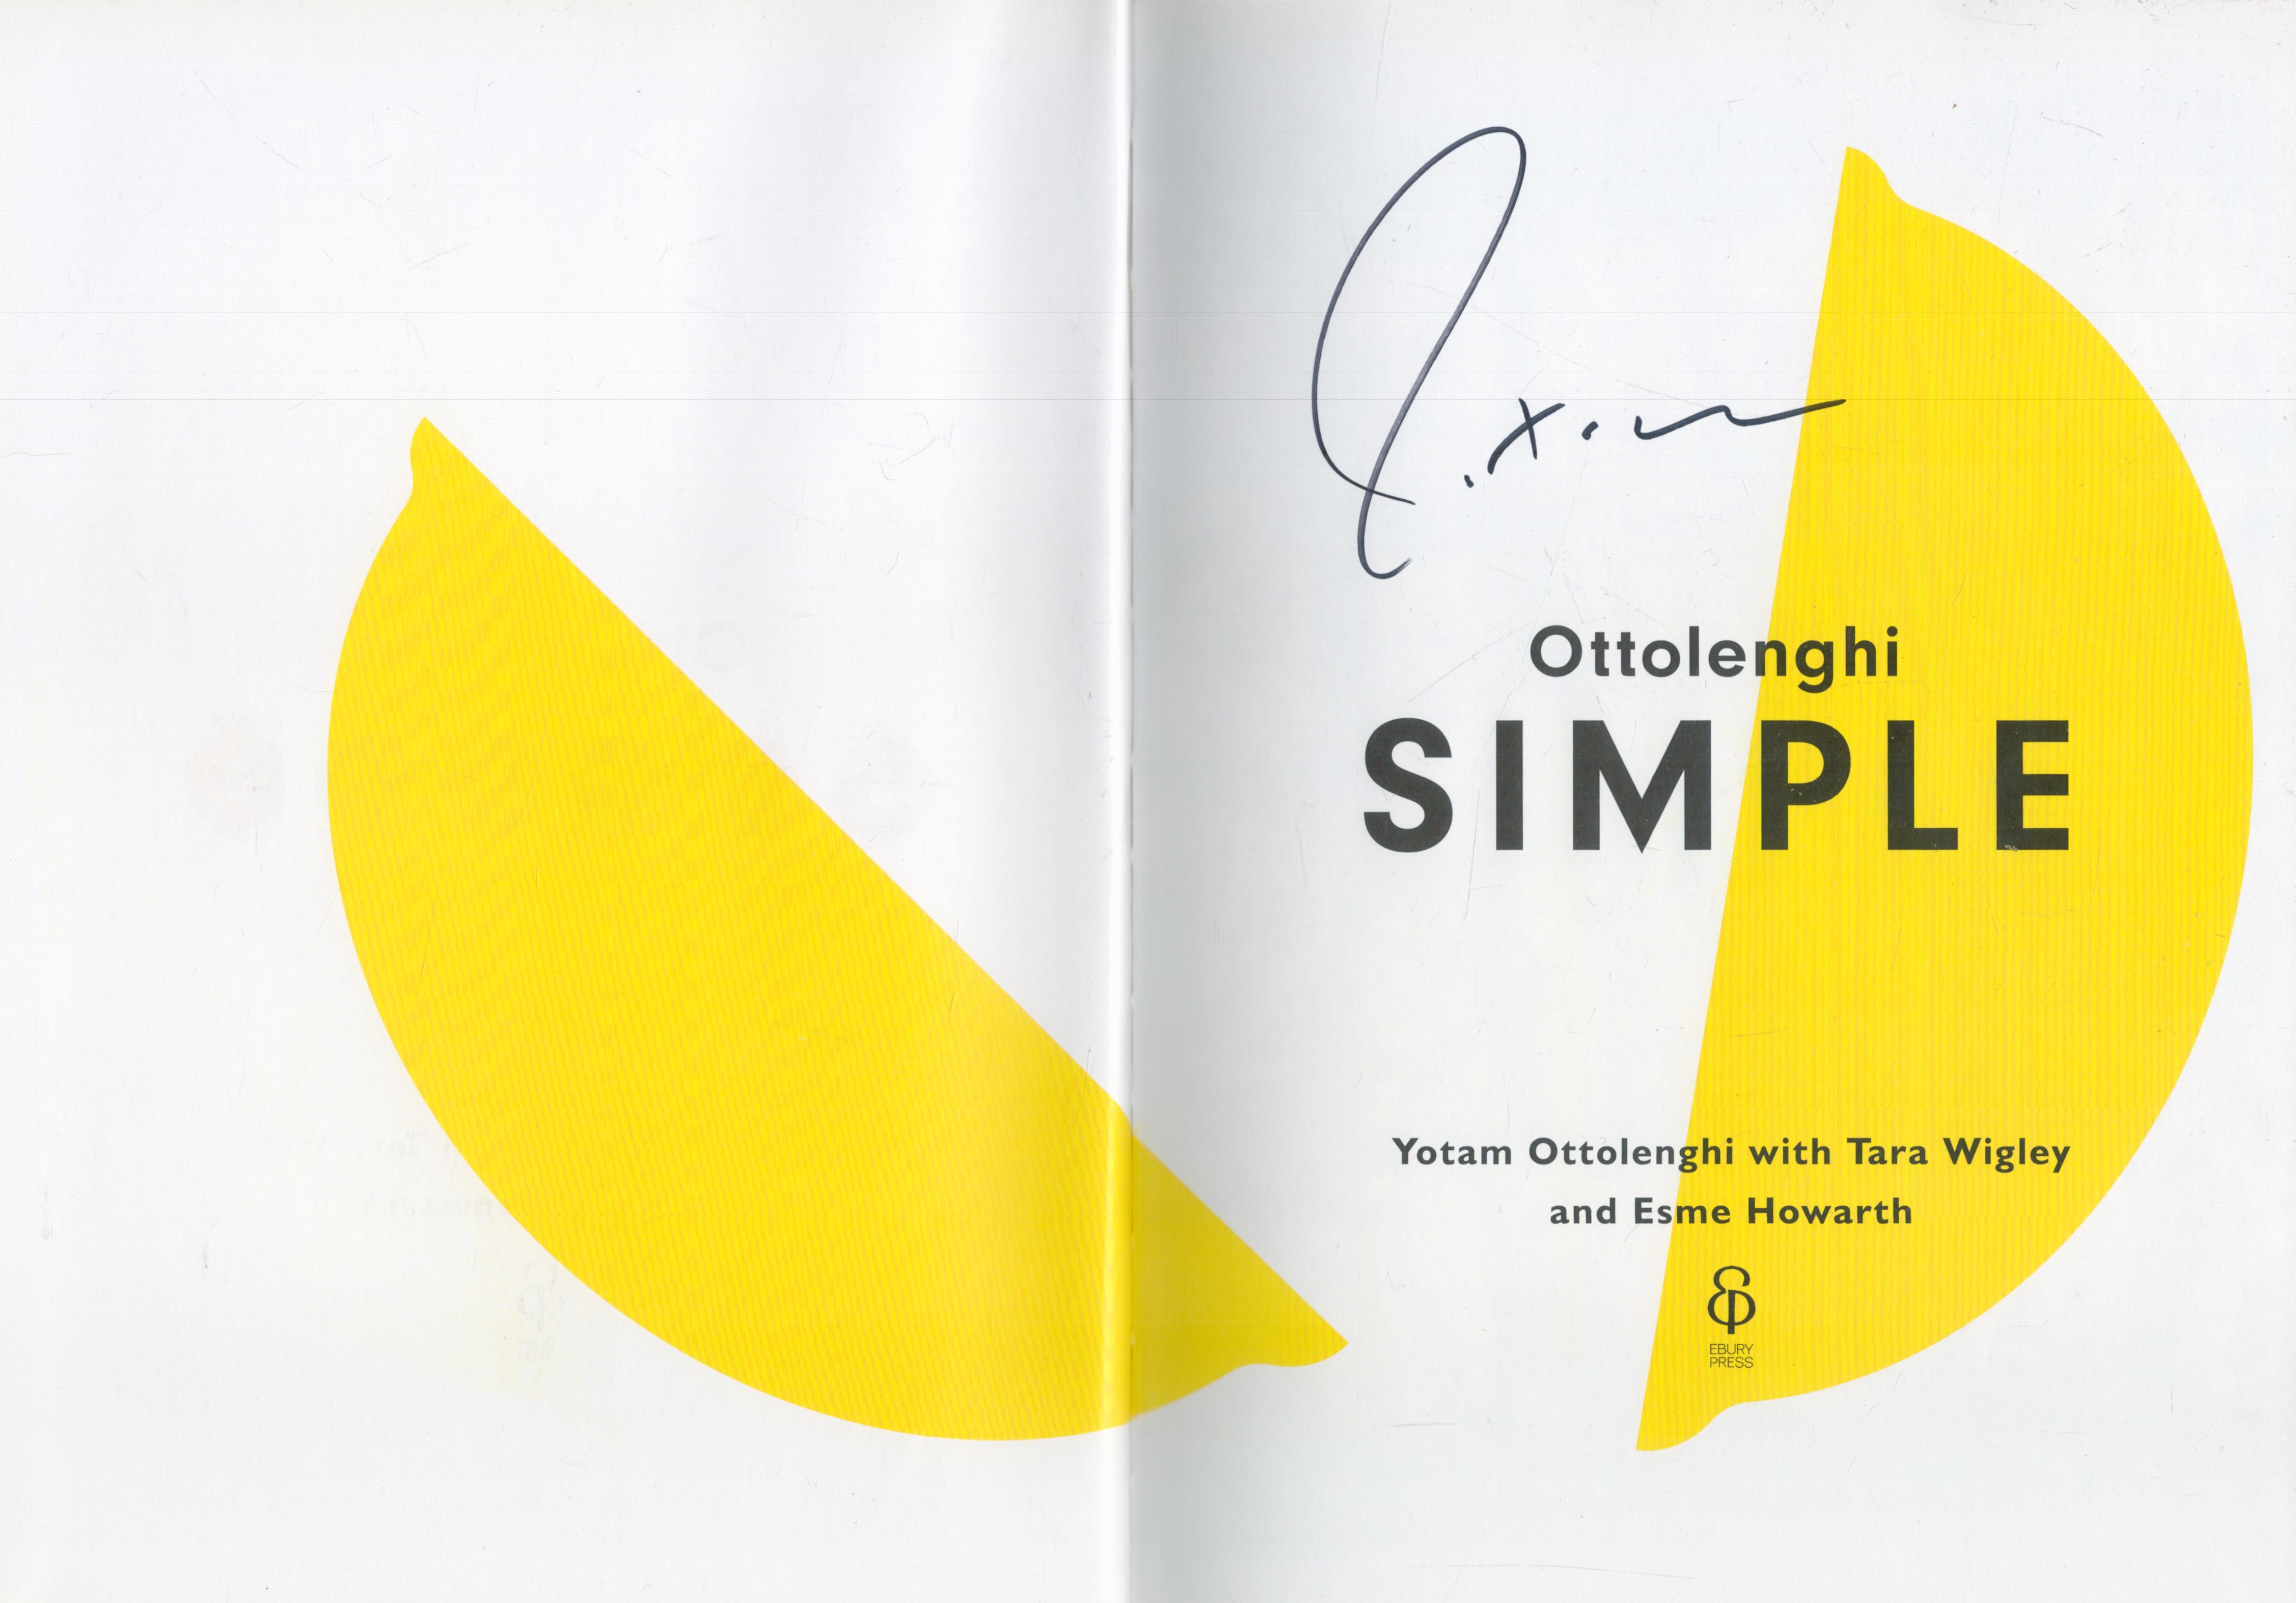 Yotam Ottolenghi Signed Book - Simple by Yotam Ottolenghi with Tara Wigley & Esme Howarth 2018 - Image 2 of 3